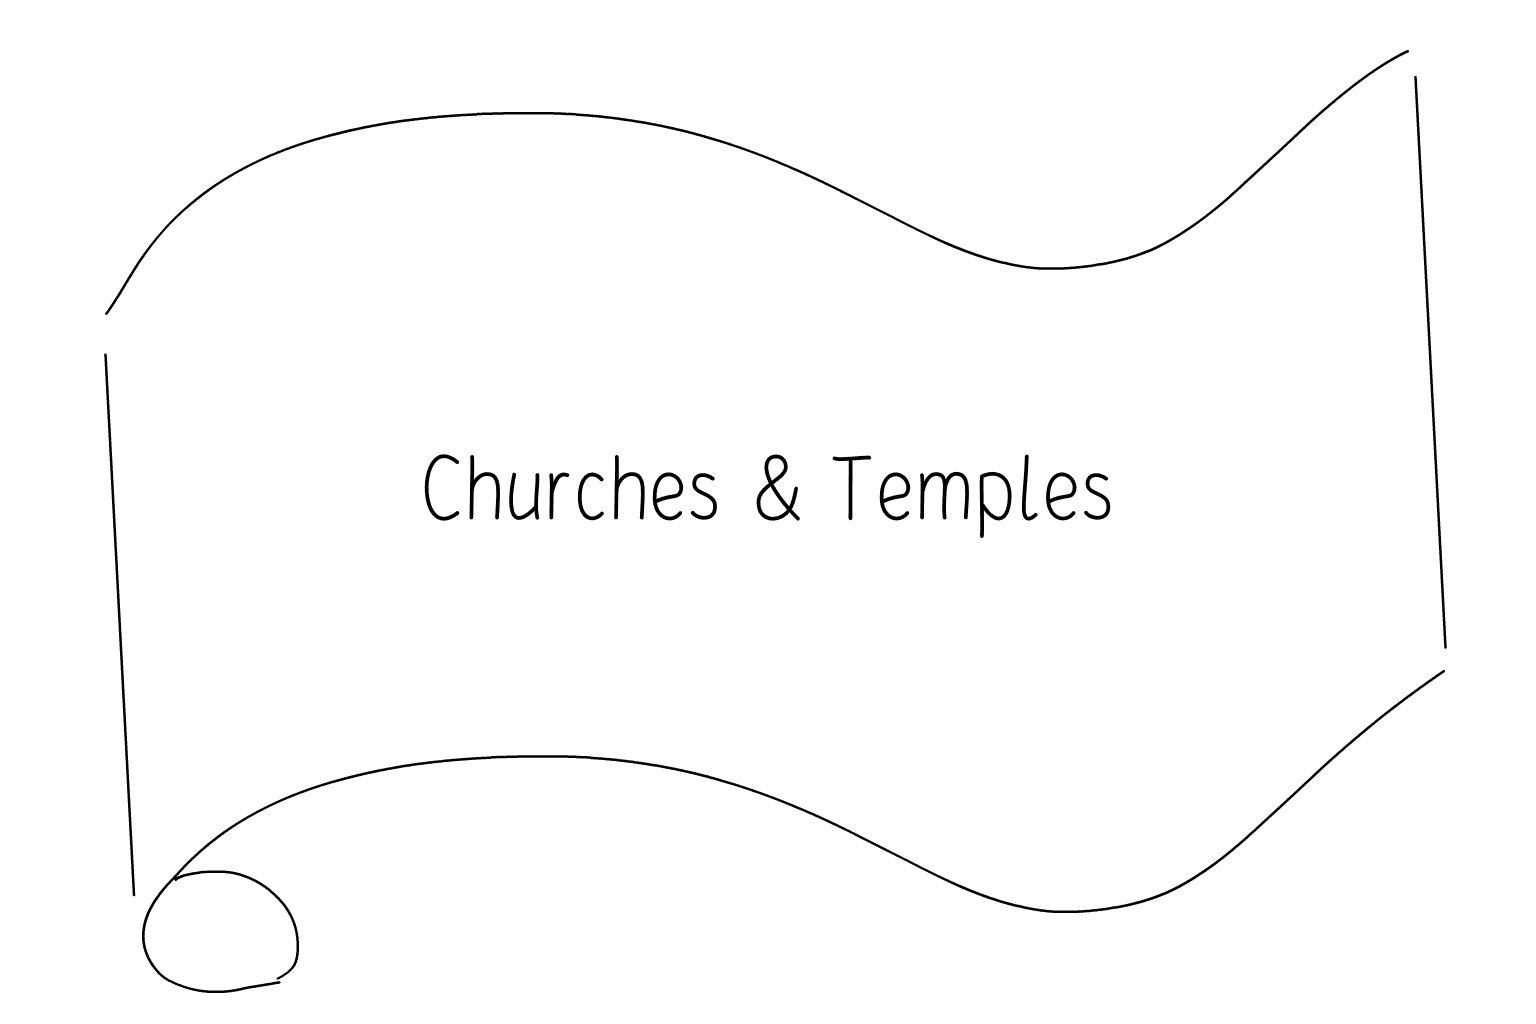 Illustration of wedding church and temple